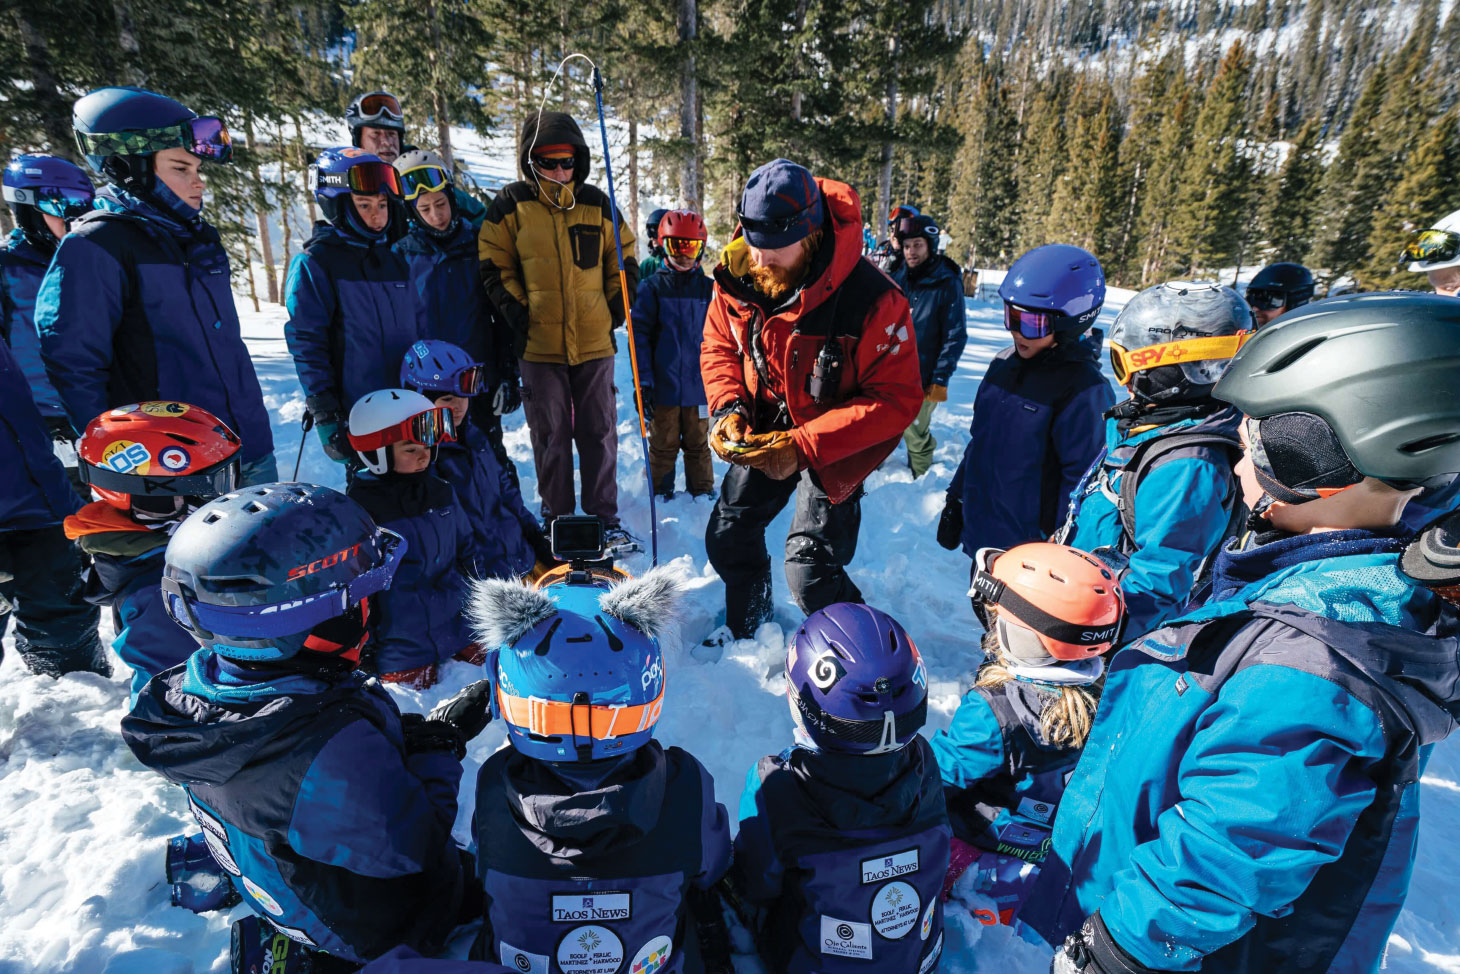 Handing out safety award in a group of skiers